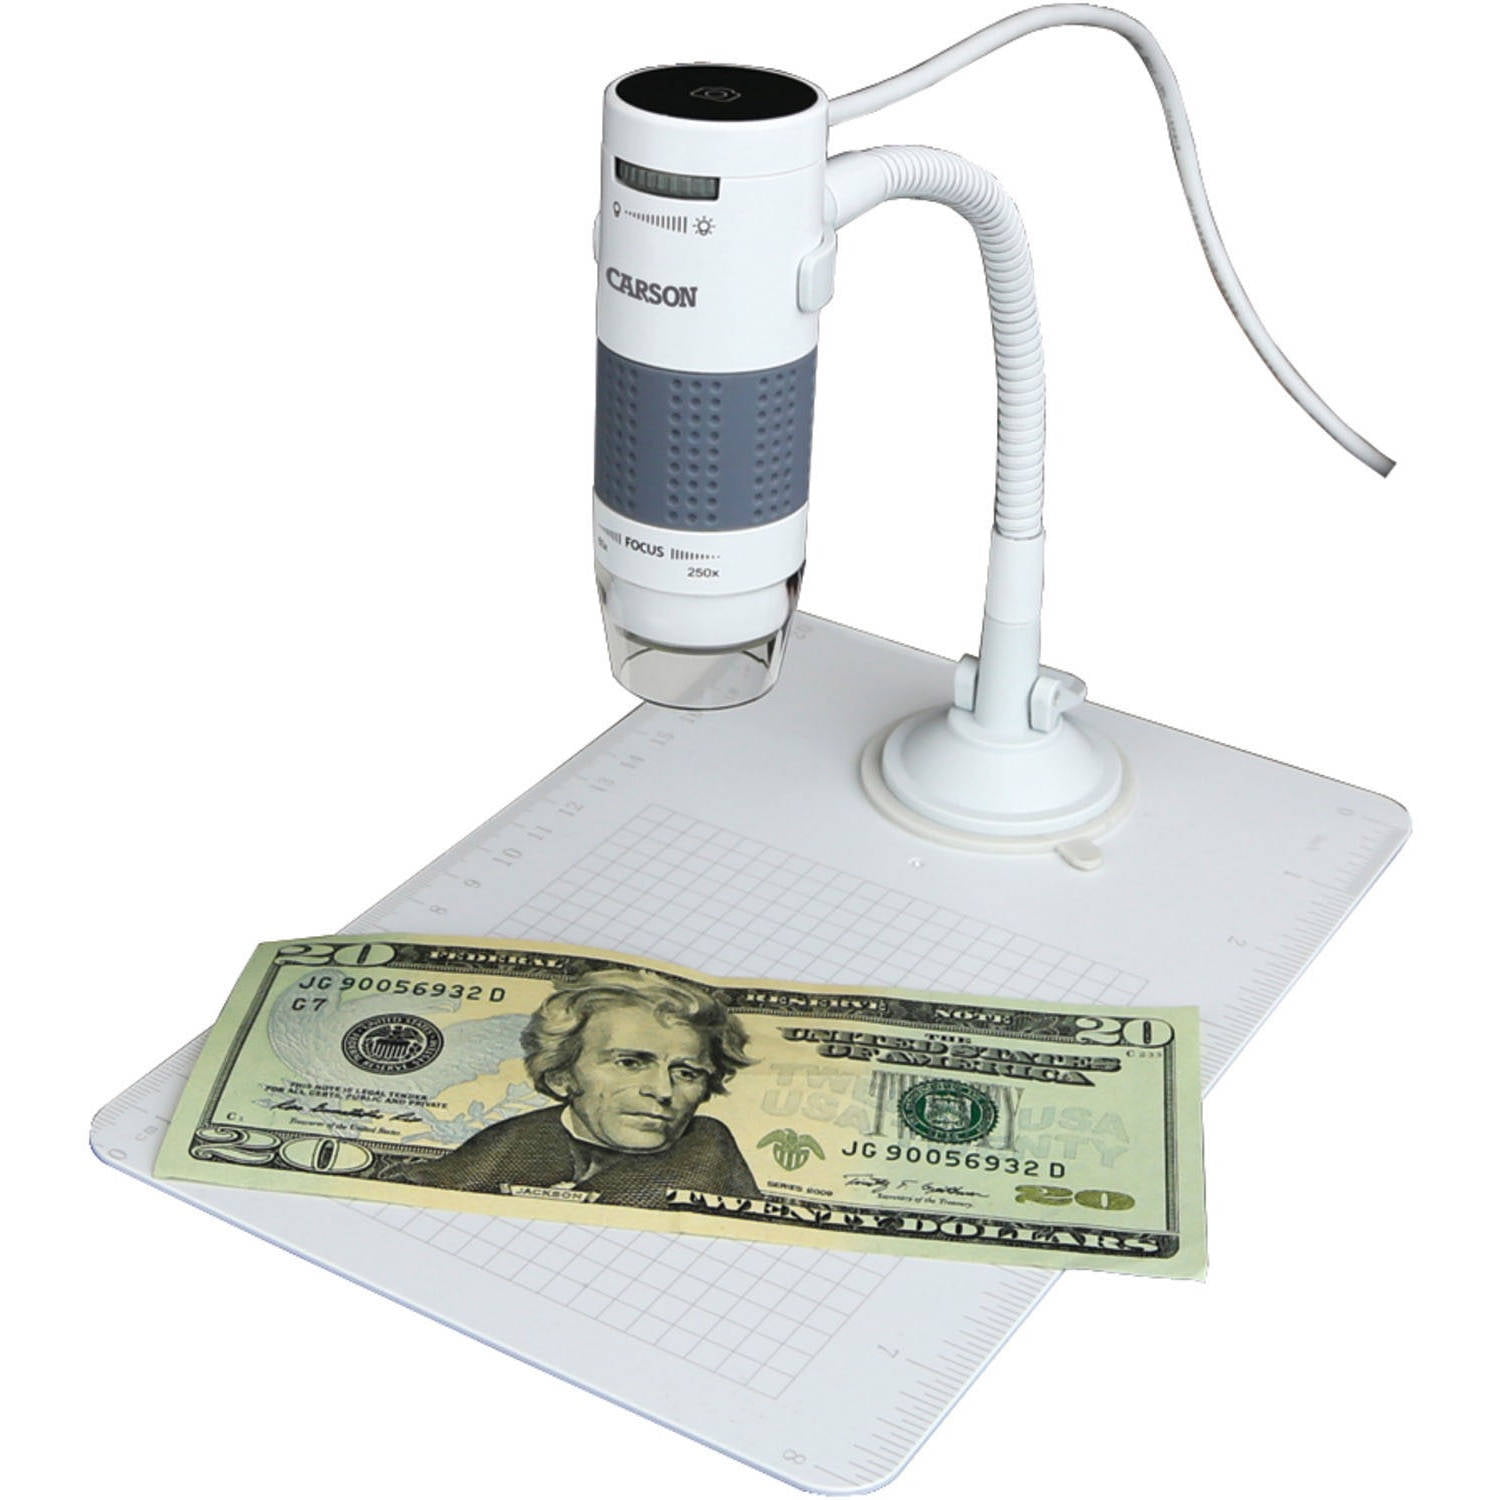 Carson eFlex 75x/300x Effective Magnification LED Lighted USB Digital Microscope with Flexible Stand and Base MM-840 Based on a 21 Monitor 